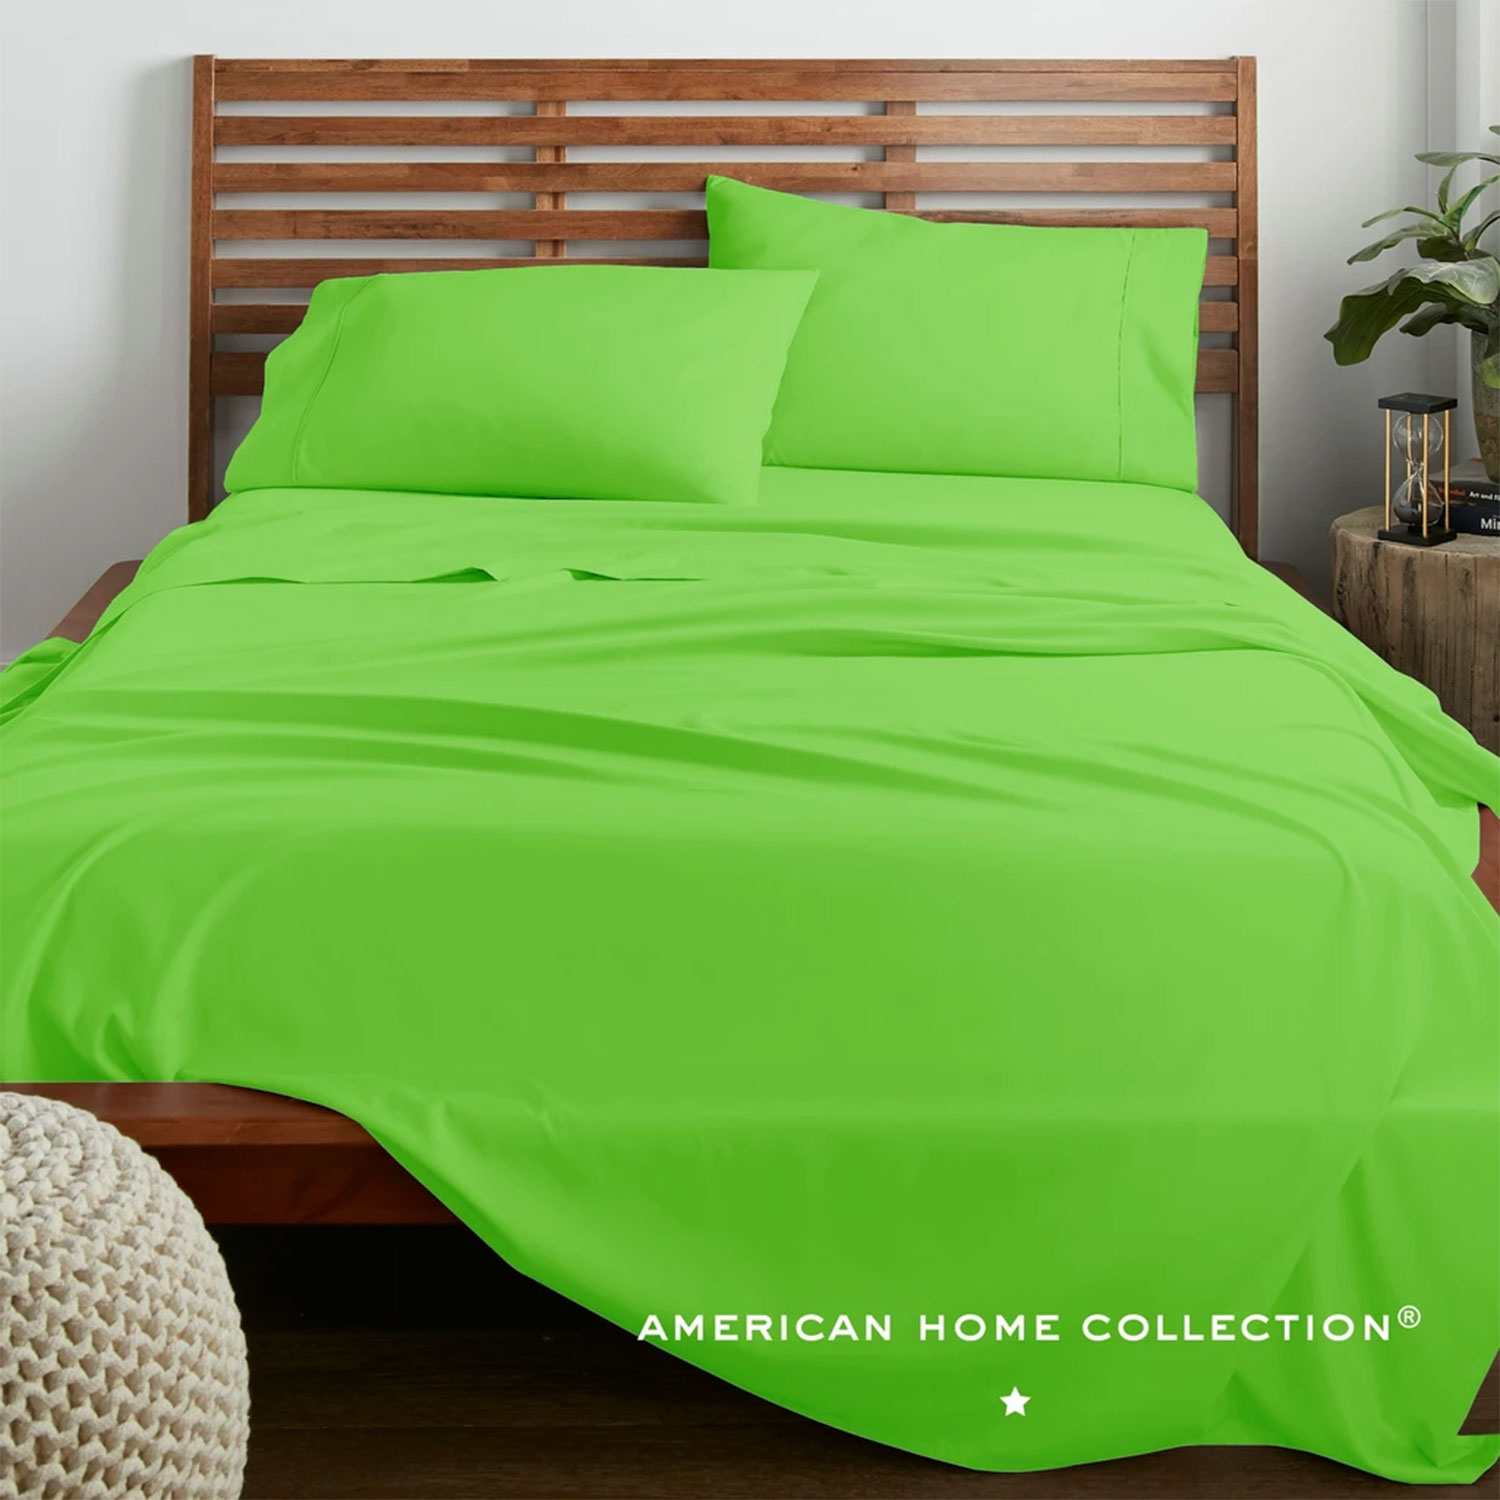 Ultra Soft 4 Piece Microfiber Bedding Sheets And Pillowcases Set-American Home Collection 